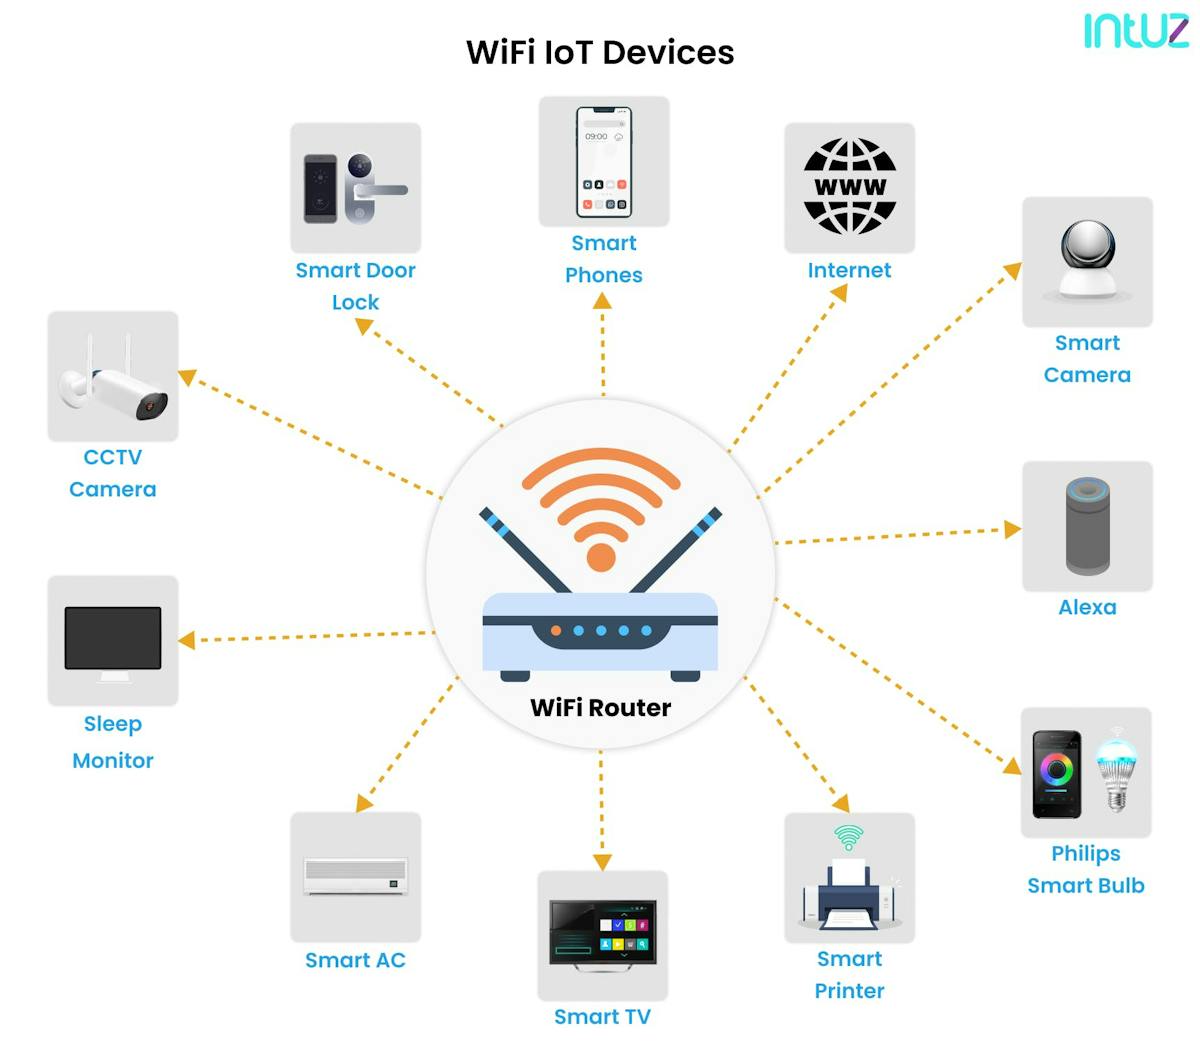 WiFi for IoT devices